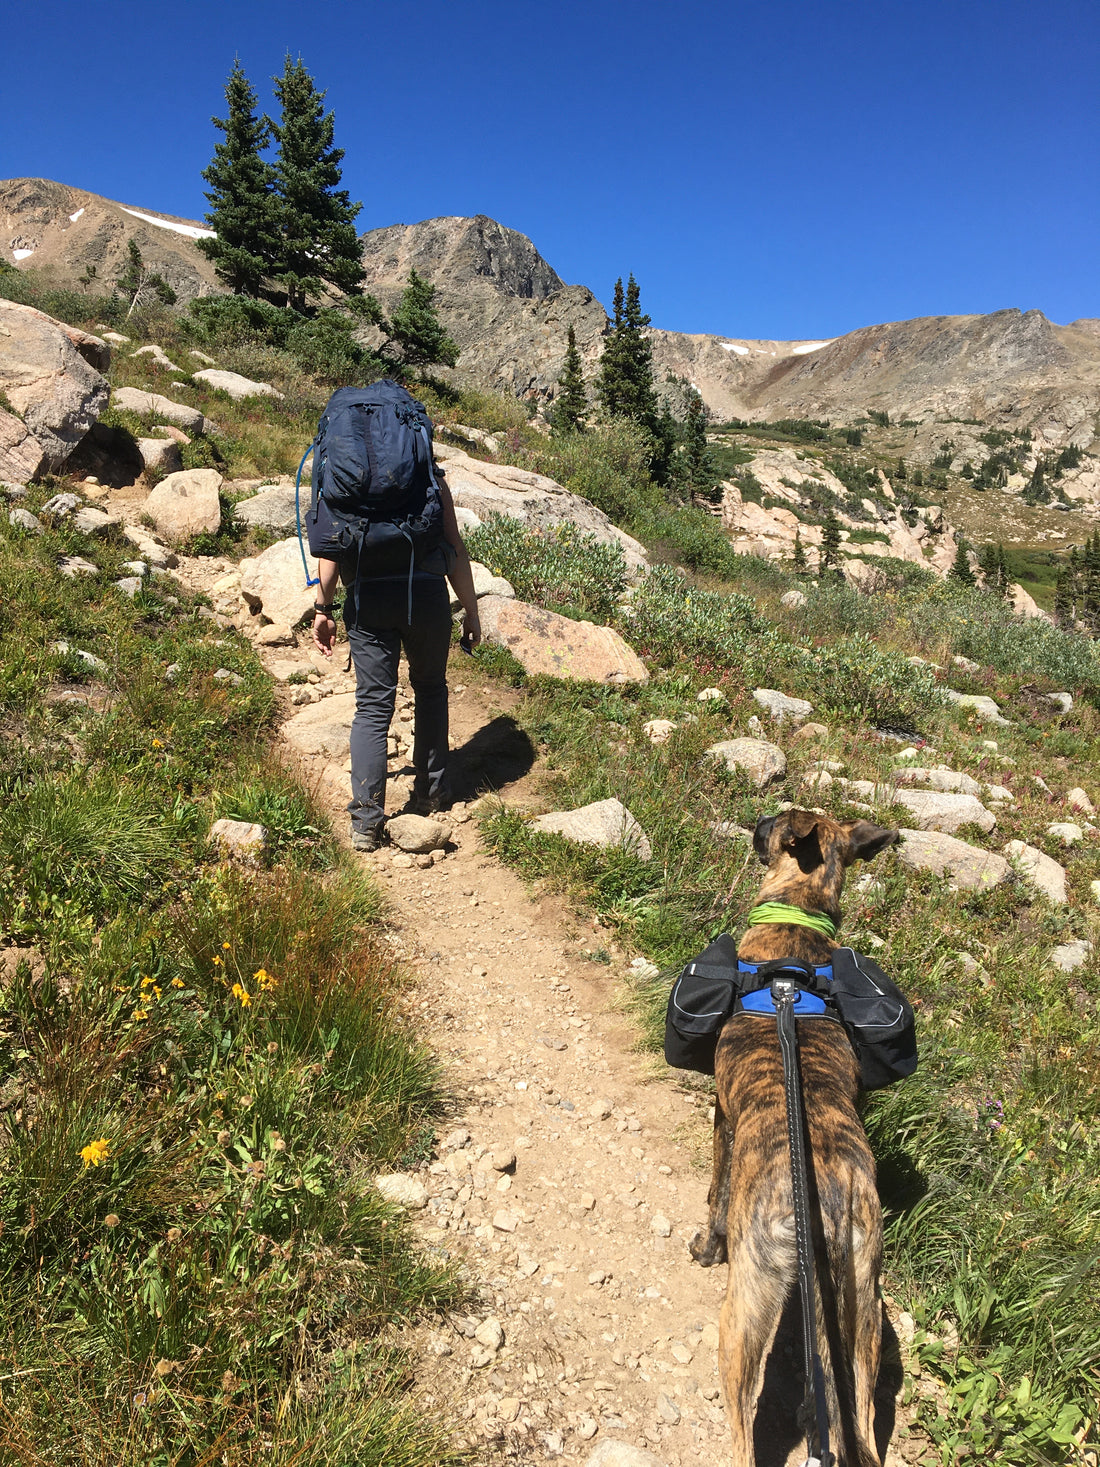 Tips for staying cool while backpacking in the Colorado heat this summer.